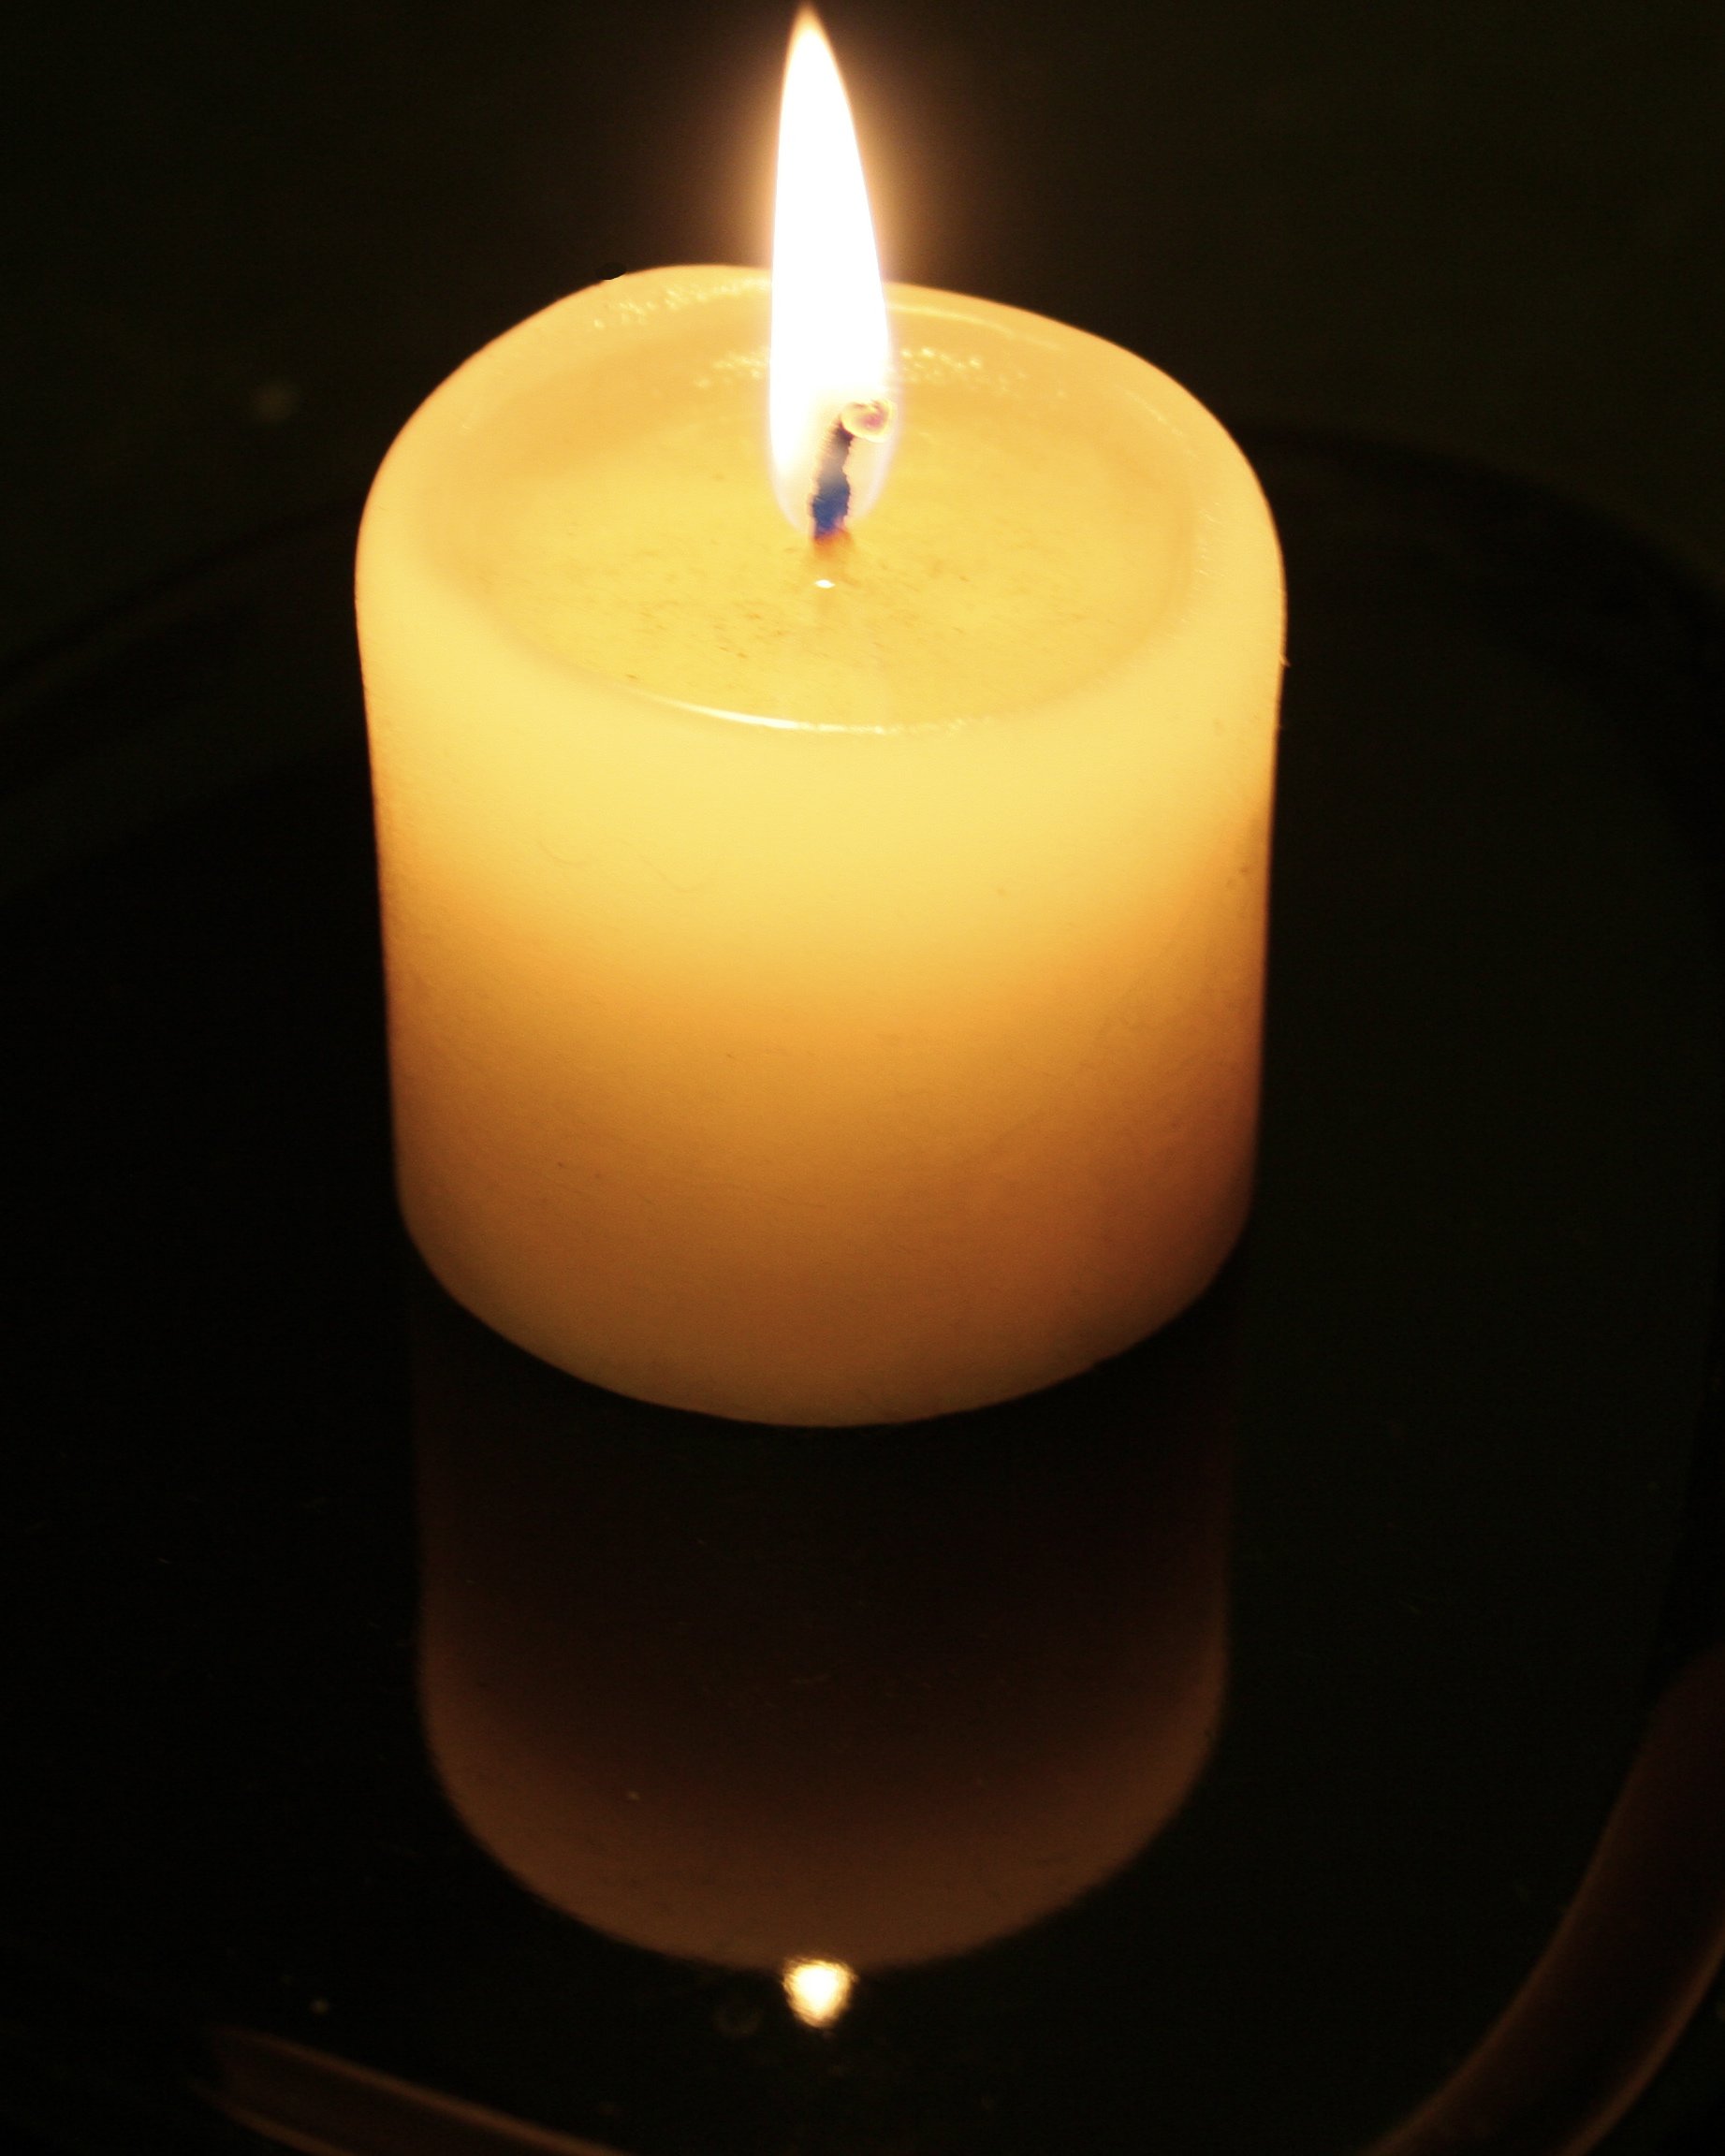 Thumbnail of a candle